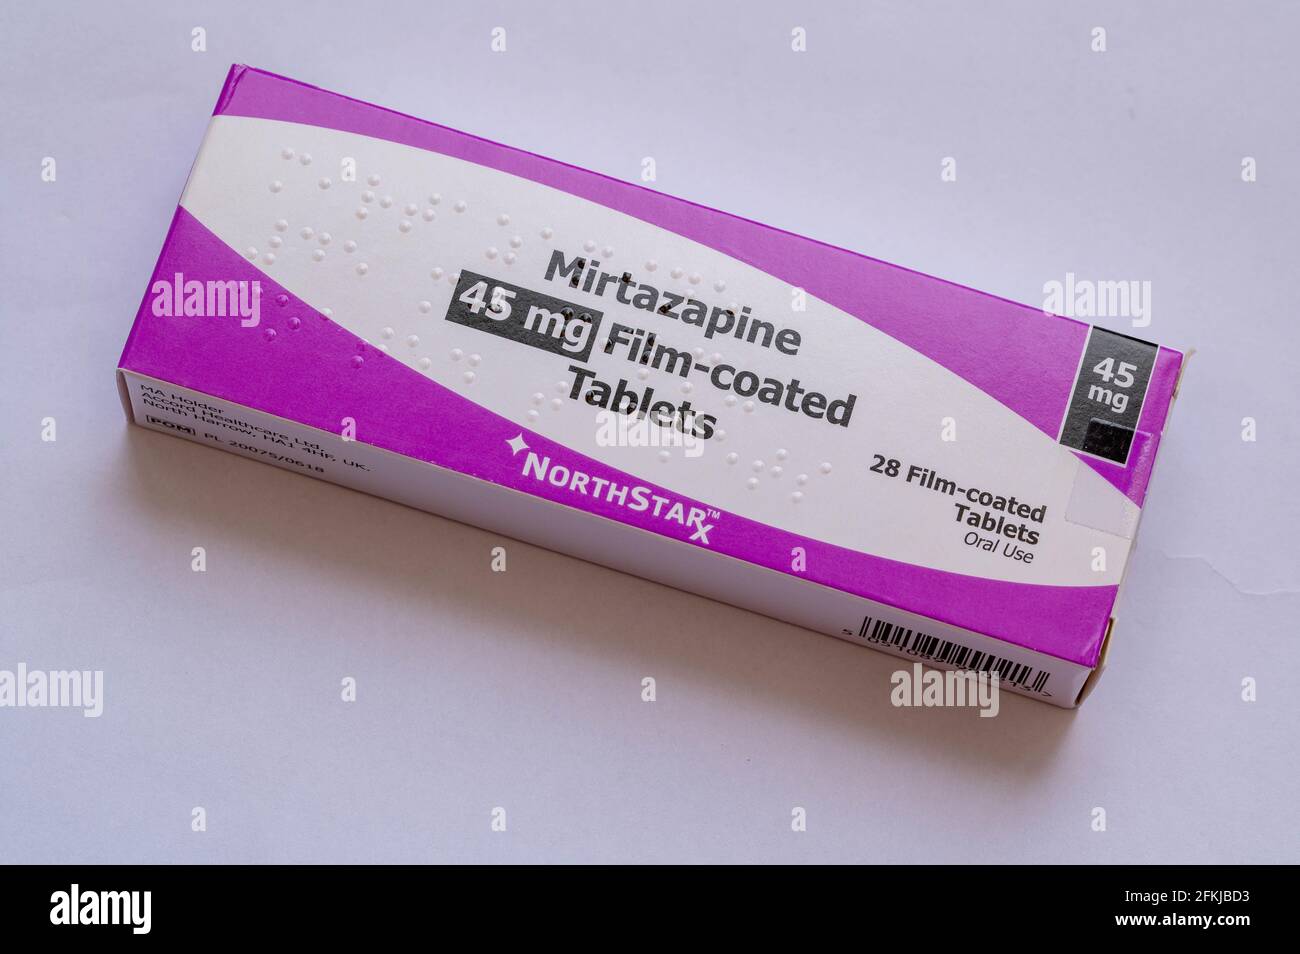 An image of a box of 45 microgram Mirtazpine tablets for the treatment of depression and sometimes OCD as well as anxiety disorders. Stock Photo